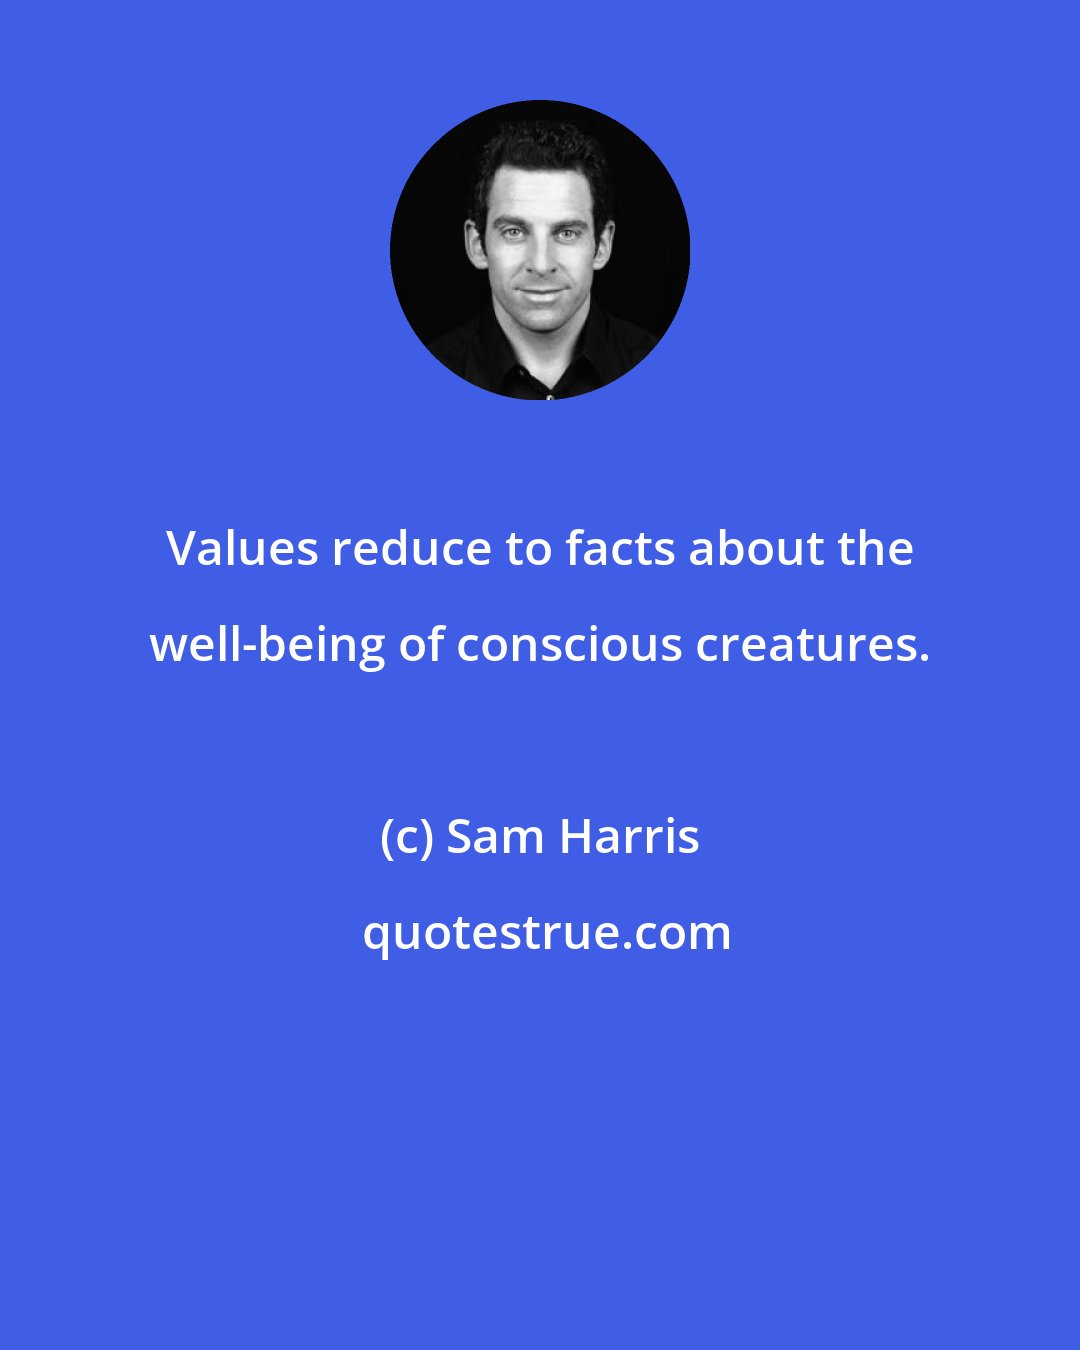 Sam Harris: Values reduce to facts about the well-being of conscious creatures.